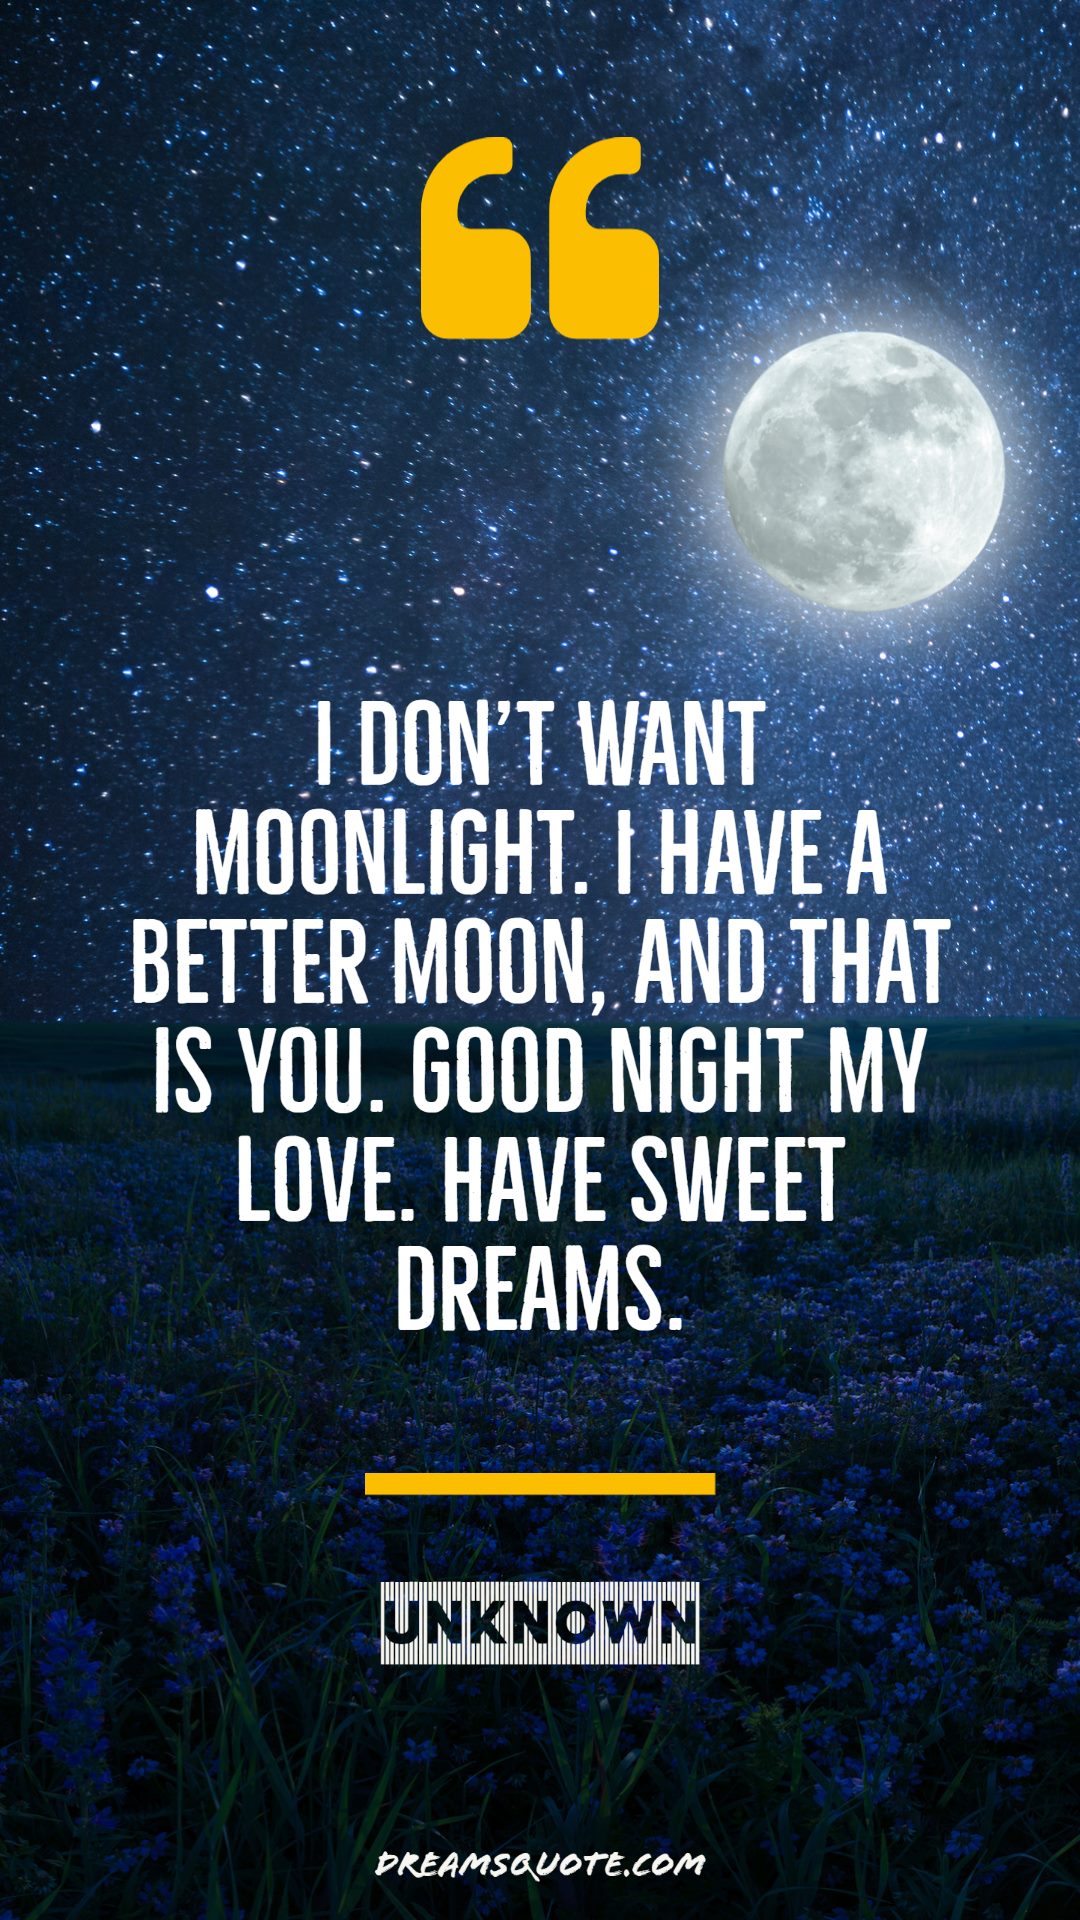 good night messages quotes and greetings to send to your girlfriend